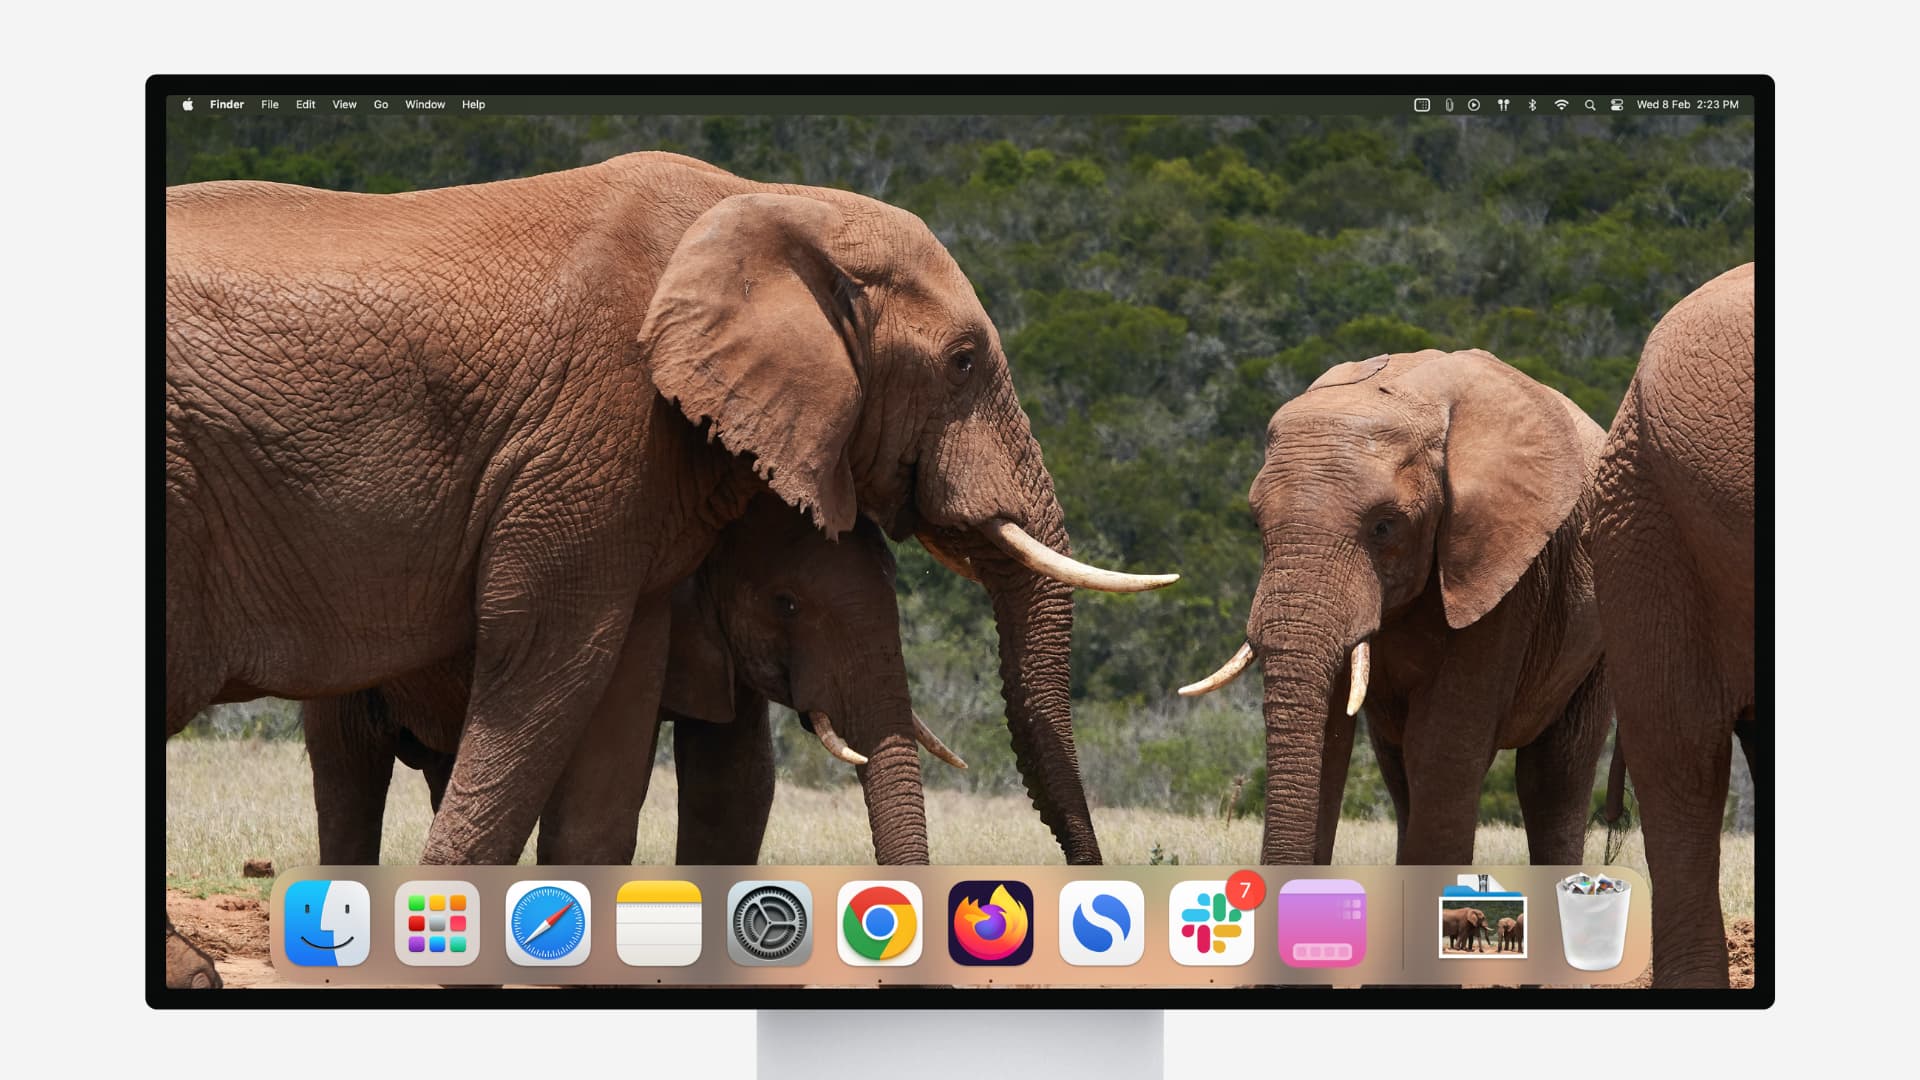 Mac showing a huge Dock at the bottom of the screen with elephants wallpaper on the desktop